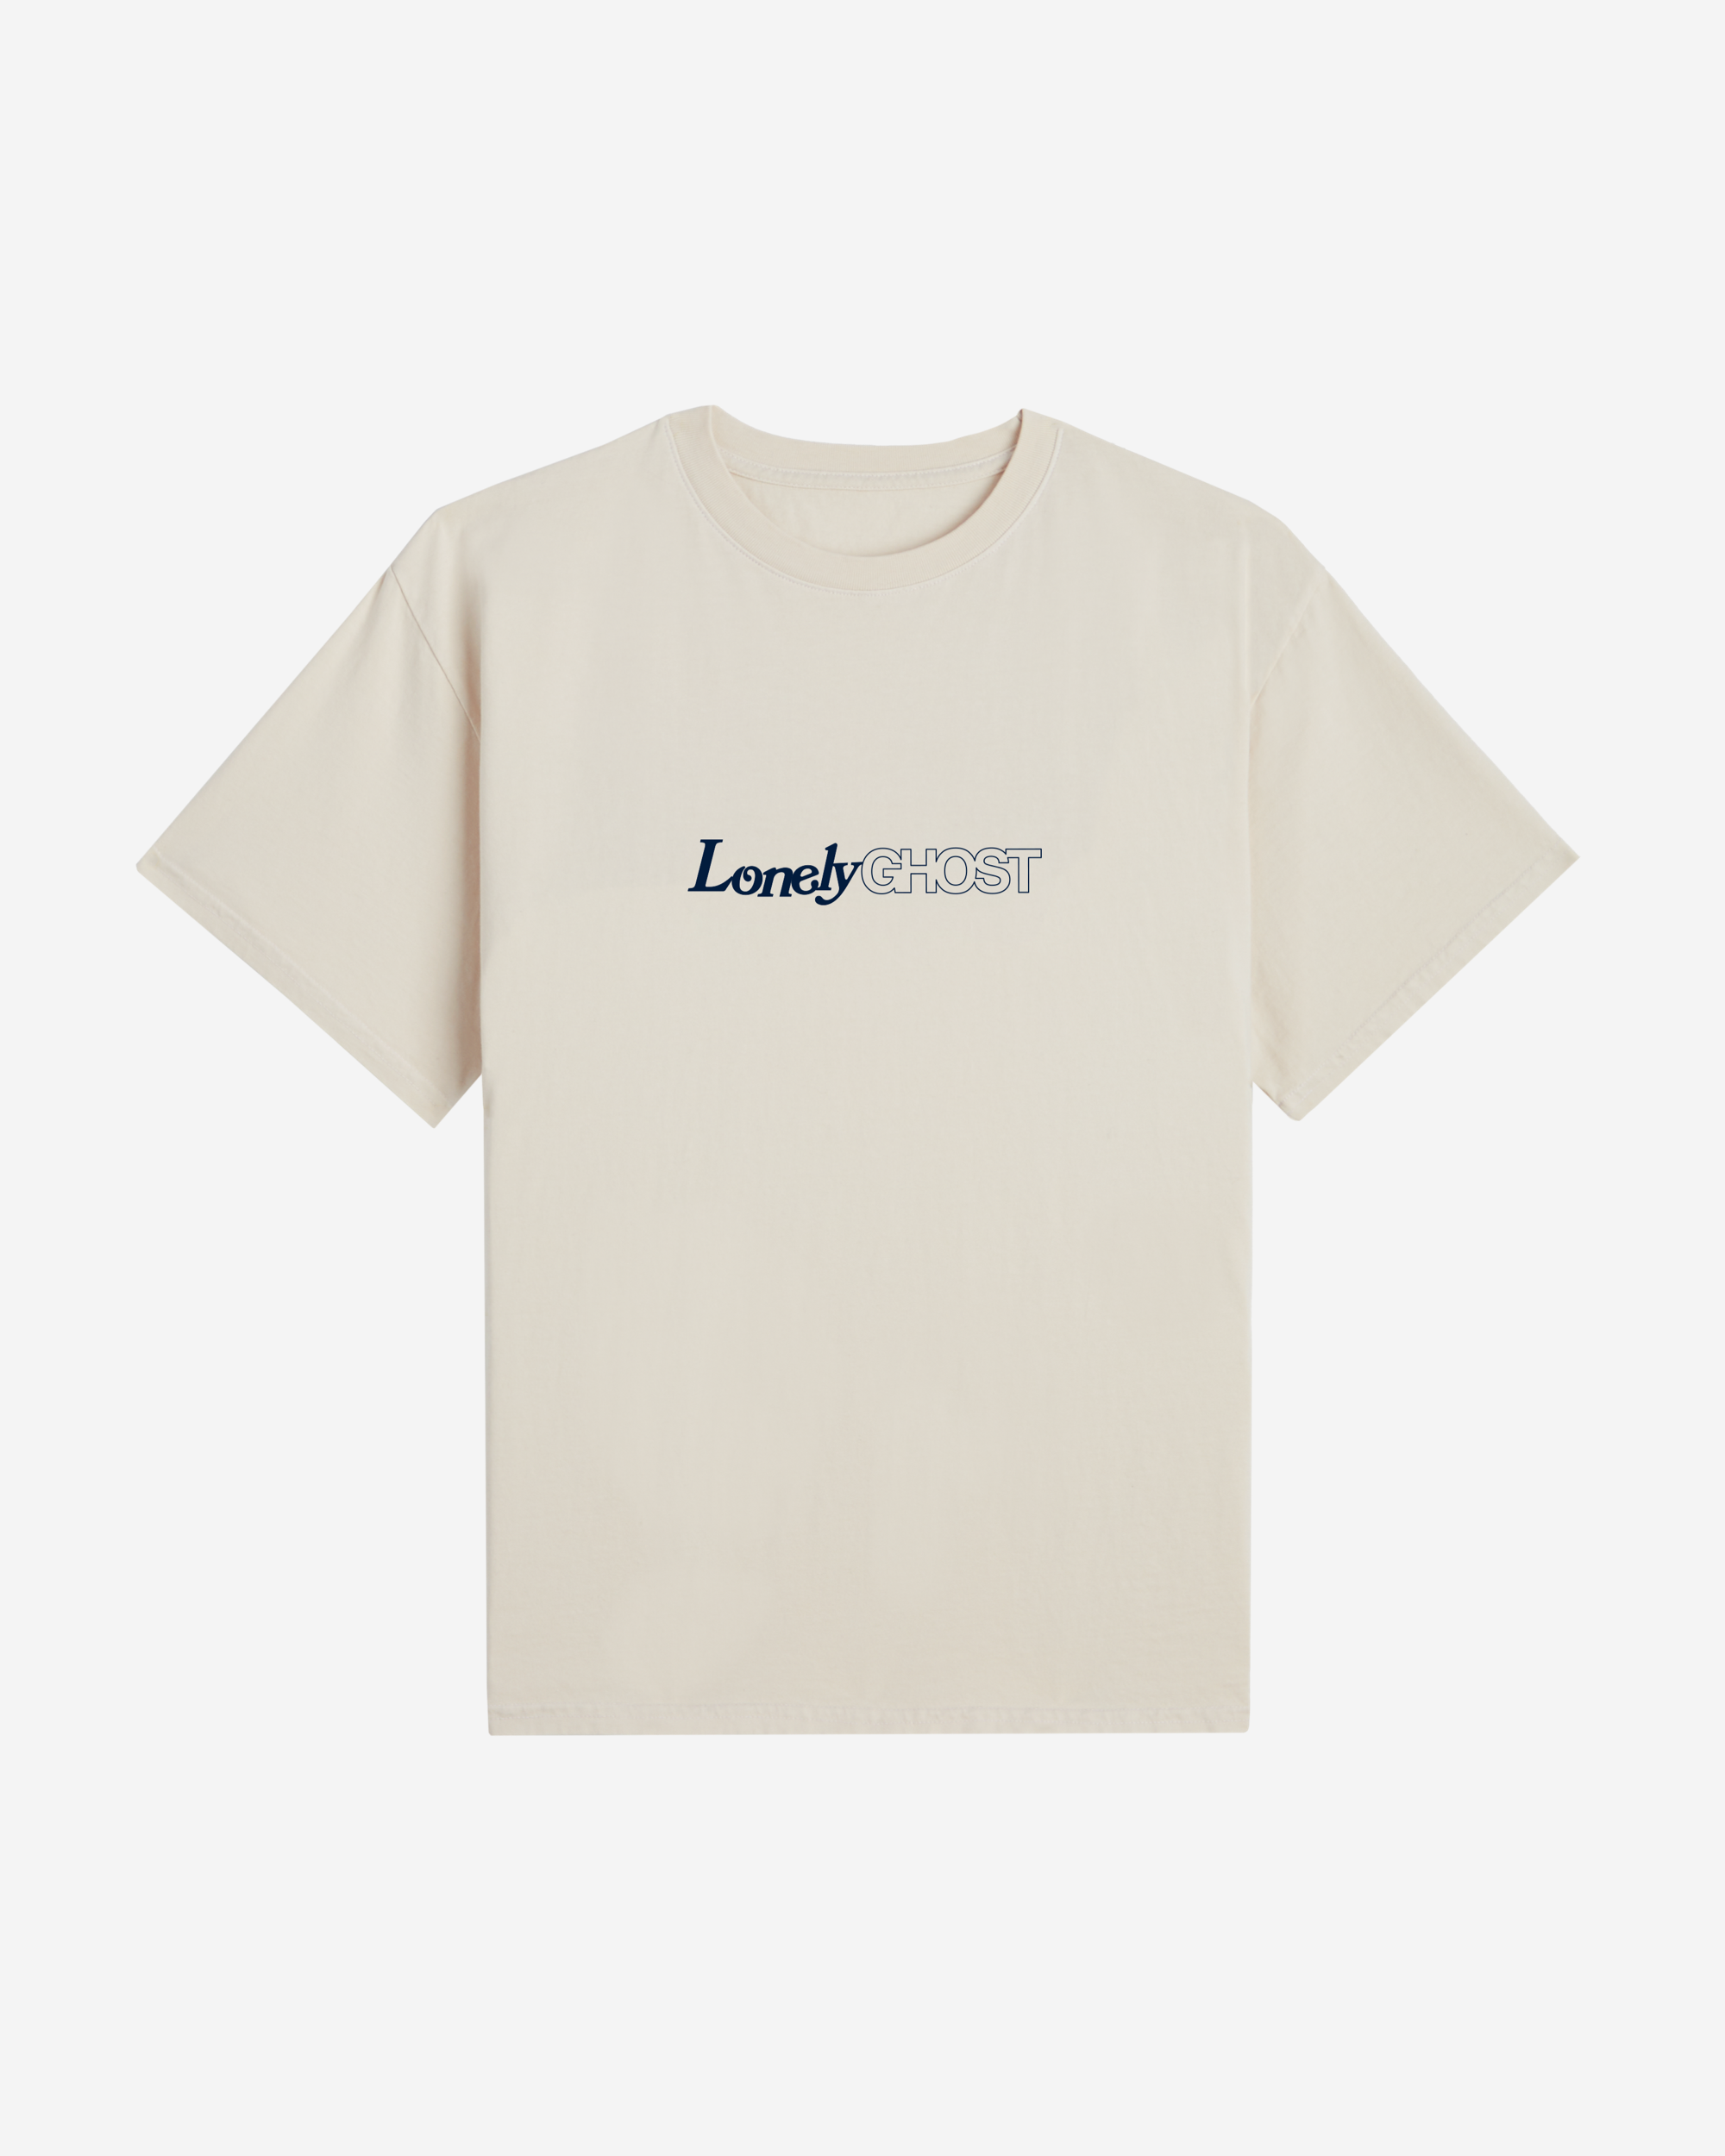 Ask Me Why I'm Lonely Tee - Navy